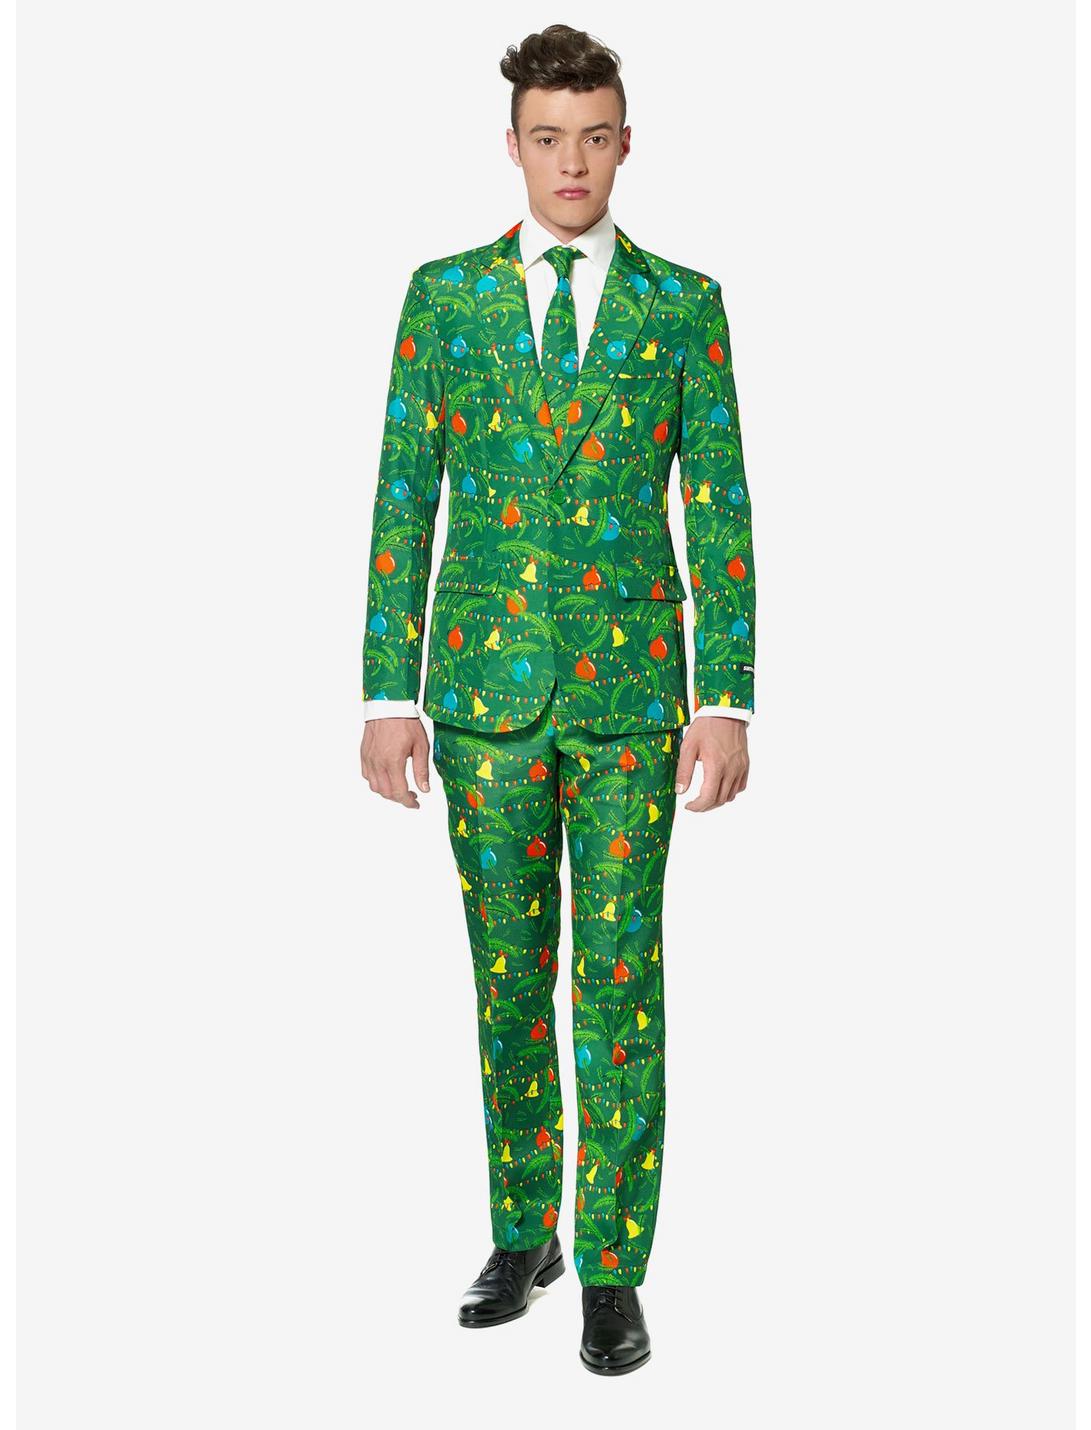 Suitmeister Men's Christmas Green Tree Christmas Suit, GREEN, hi-res